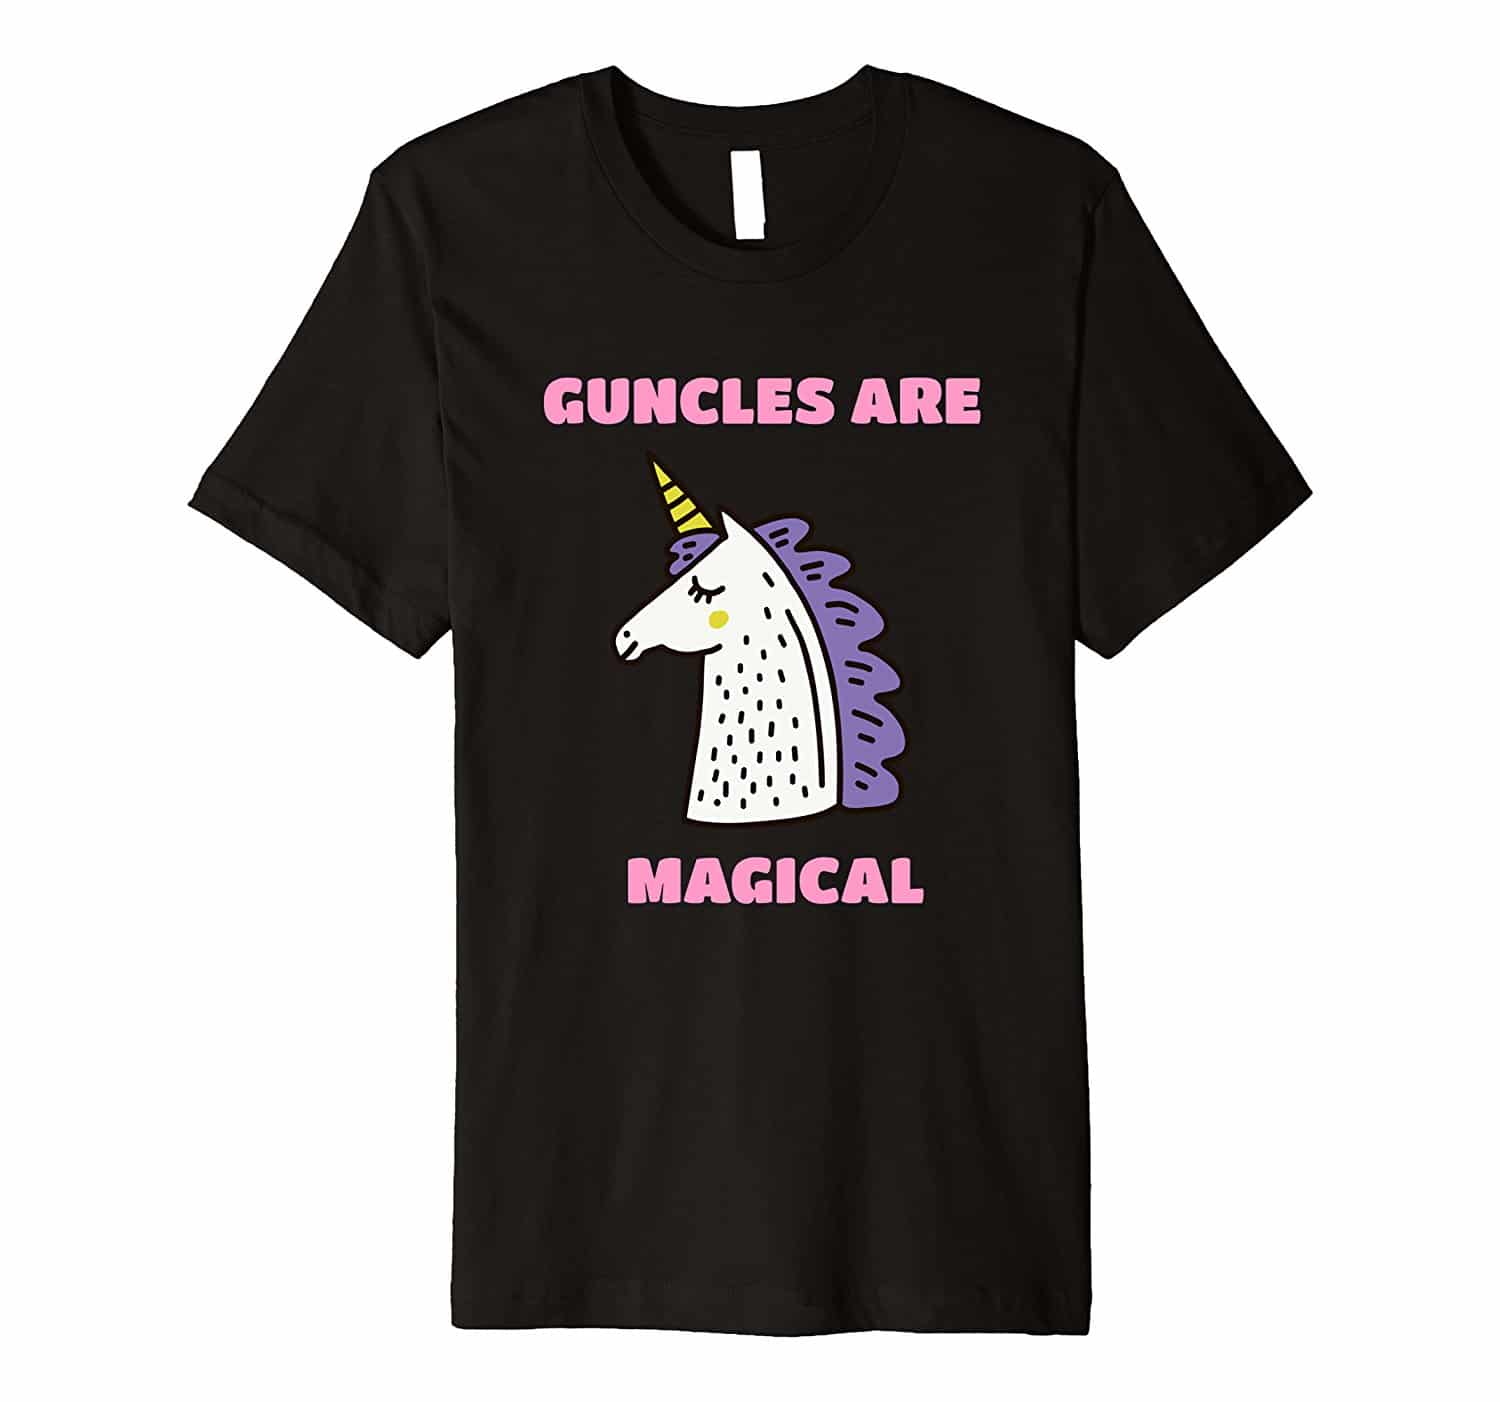 Best Gift for Guncle 2018: Guncles are Magical 2022